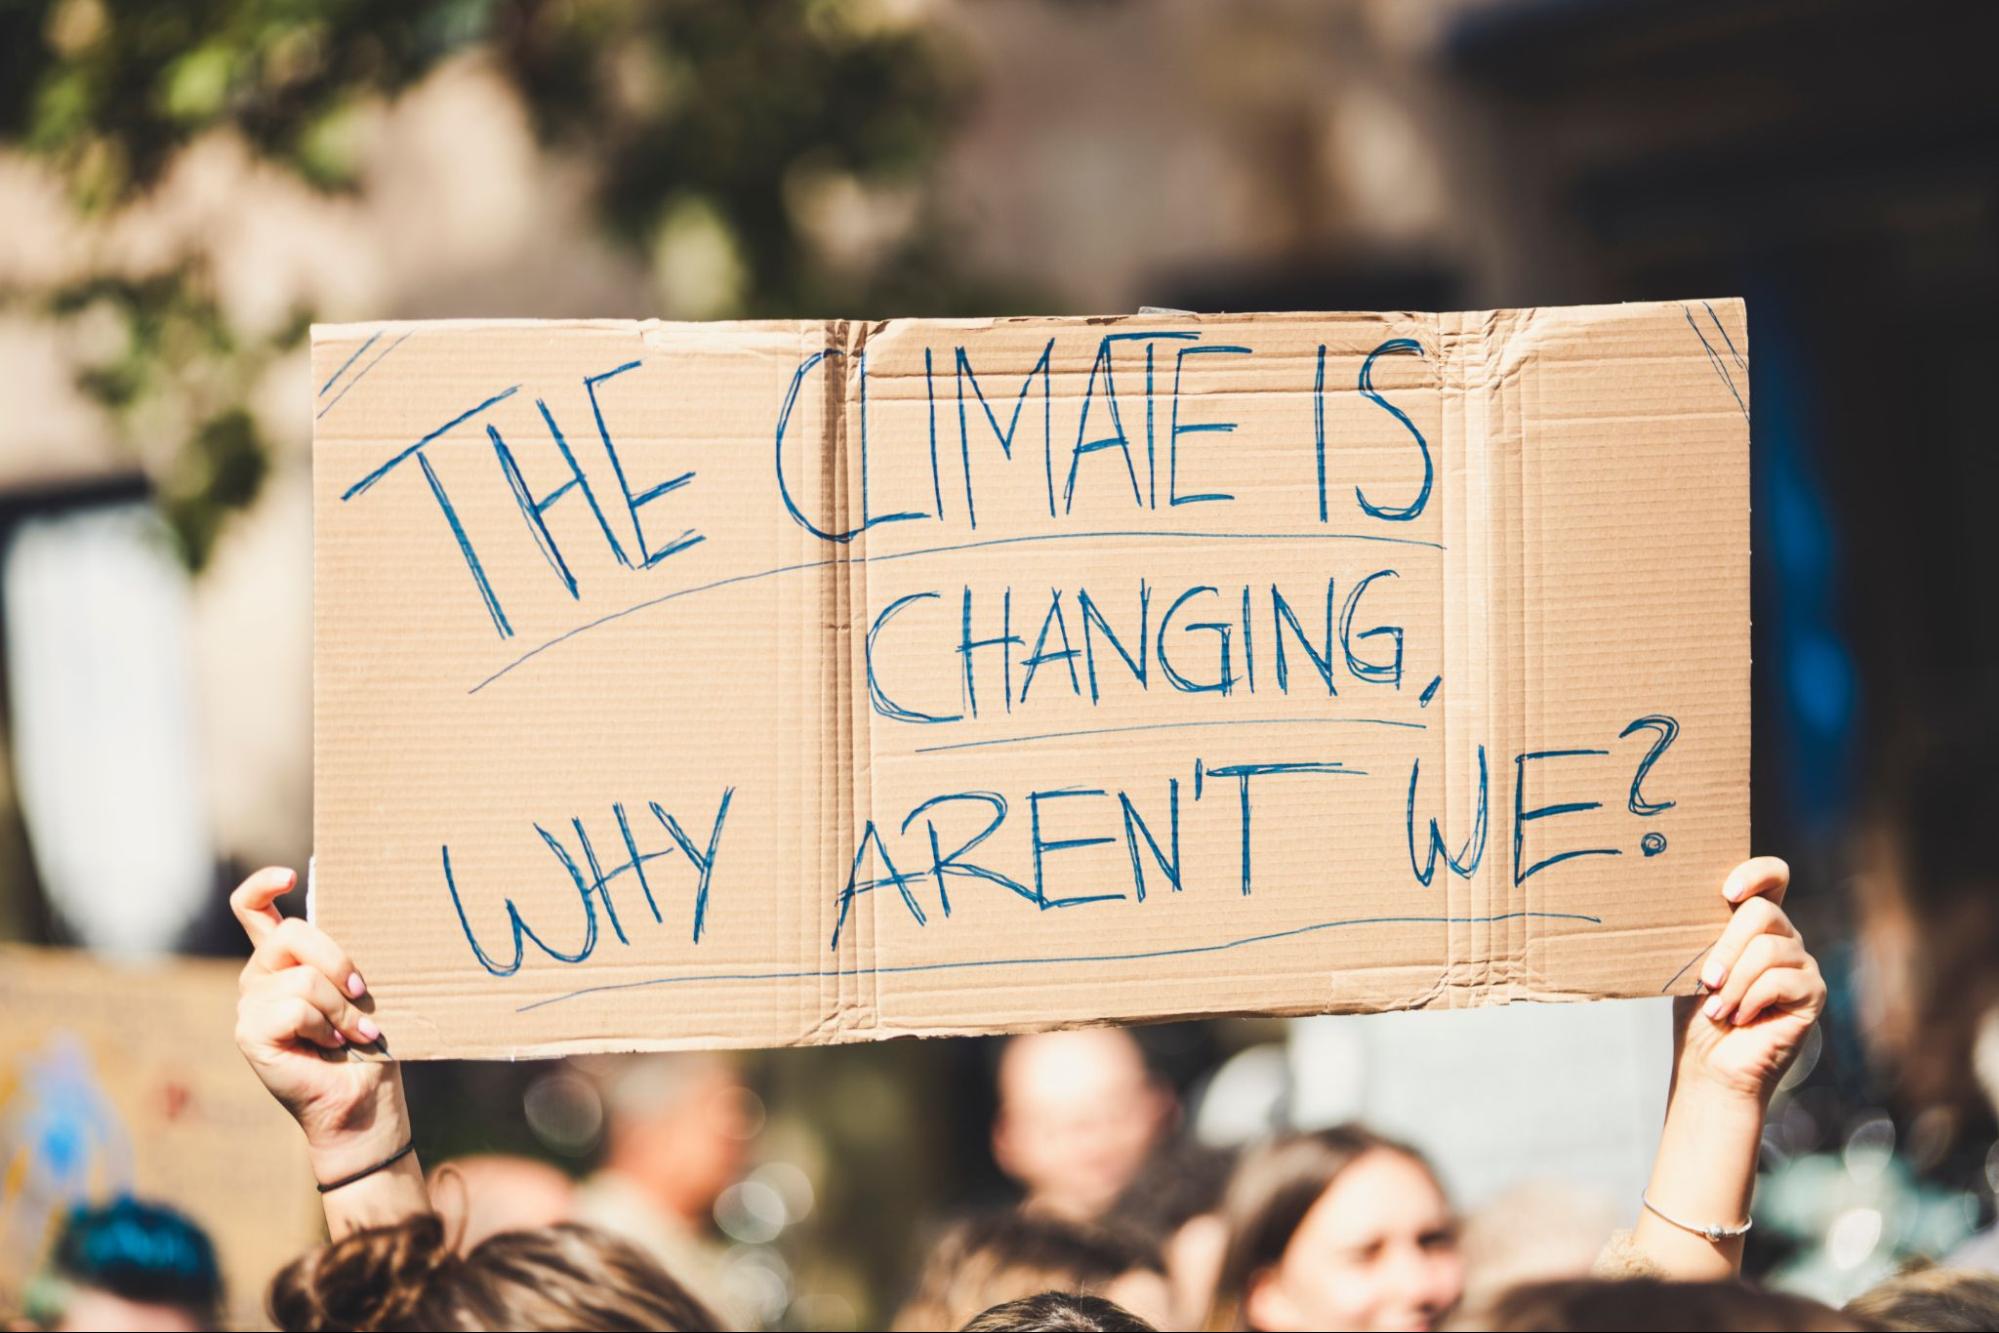 Arms holding up a sign saying: "The Climate is Changing, Why Aren't We?" at a climate protest